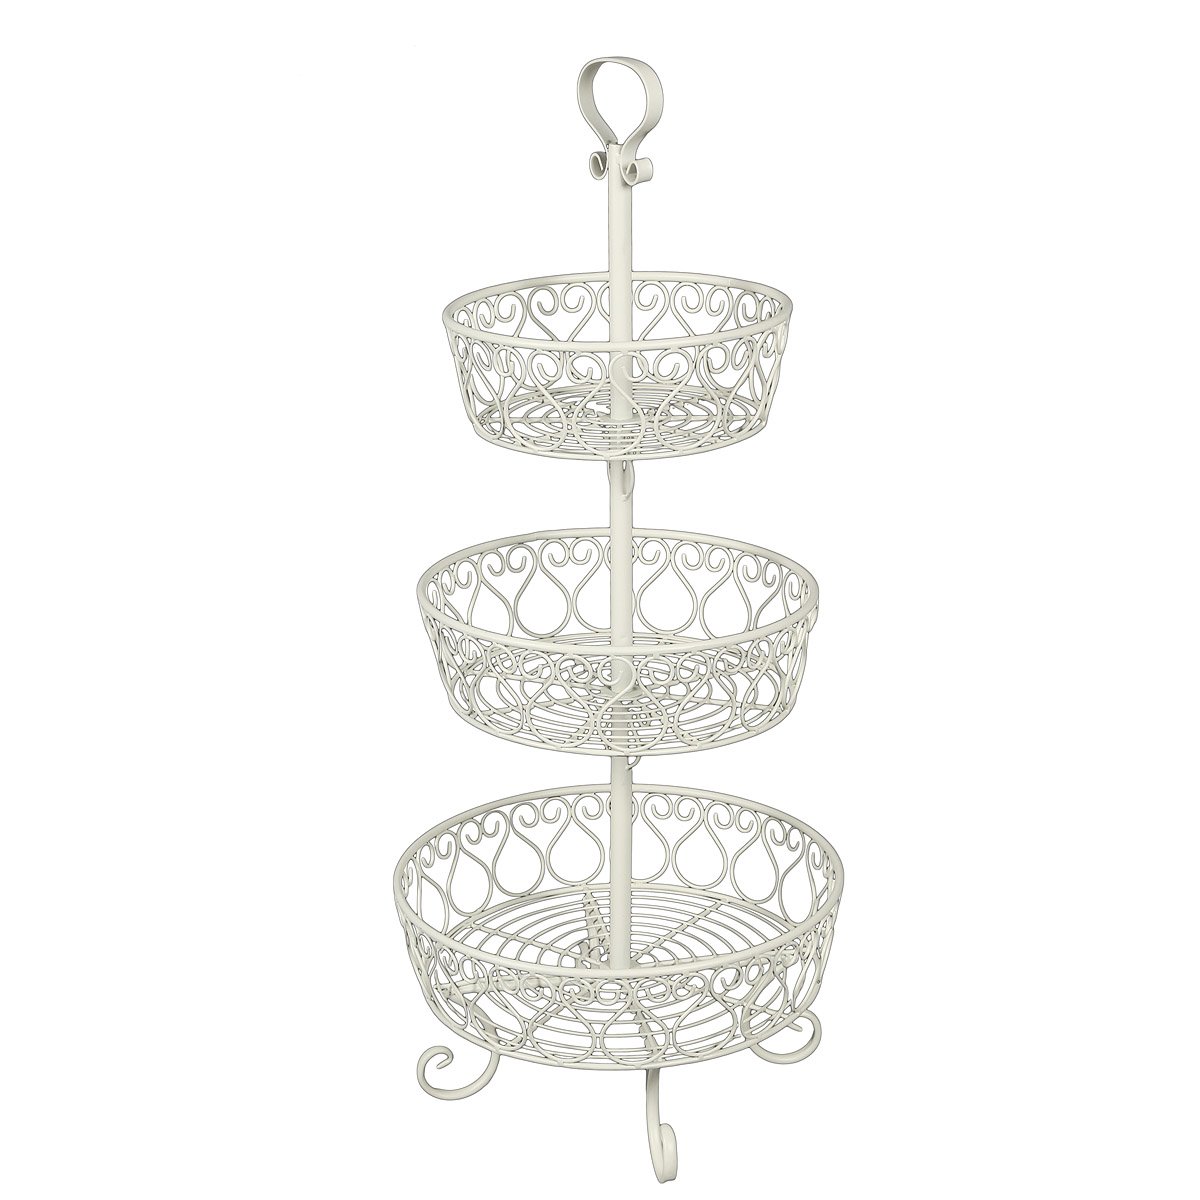 Etagere - Shabby Chic - weiss